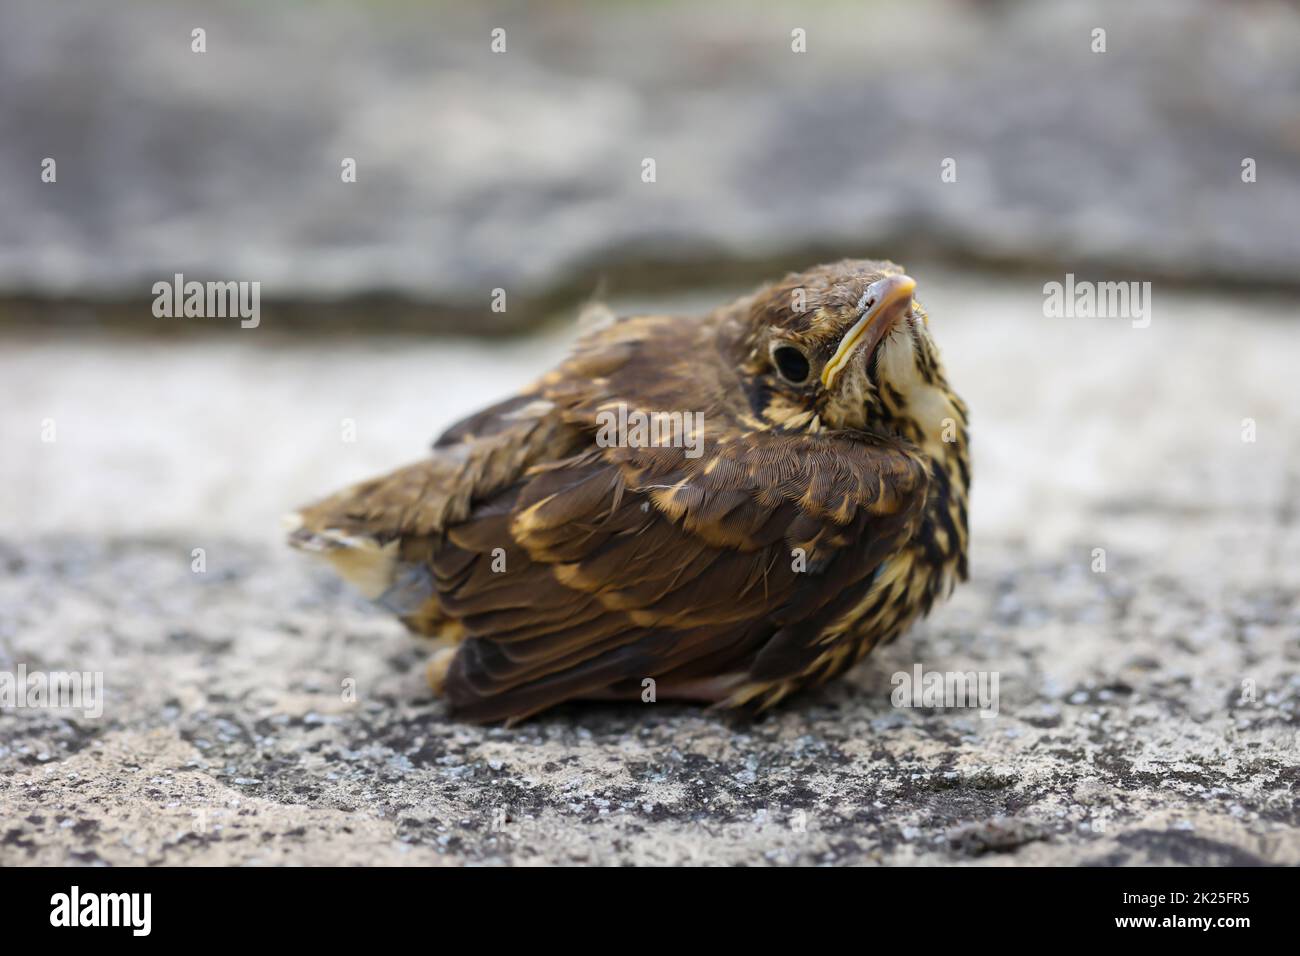 Close up of a young fledgling song thrush, baby of a song thrush. Stock Photo